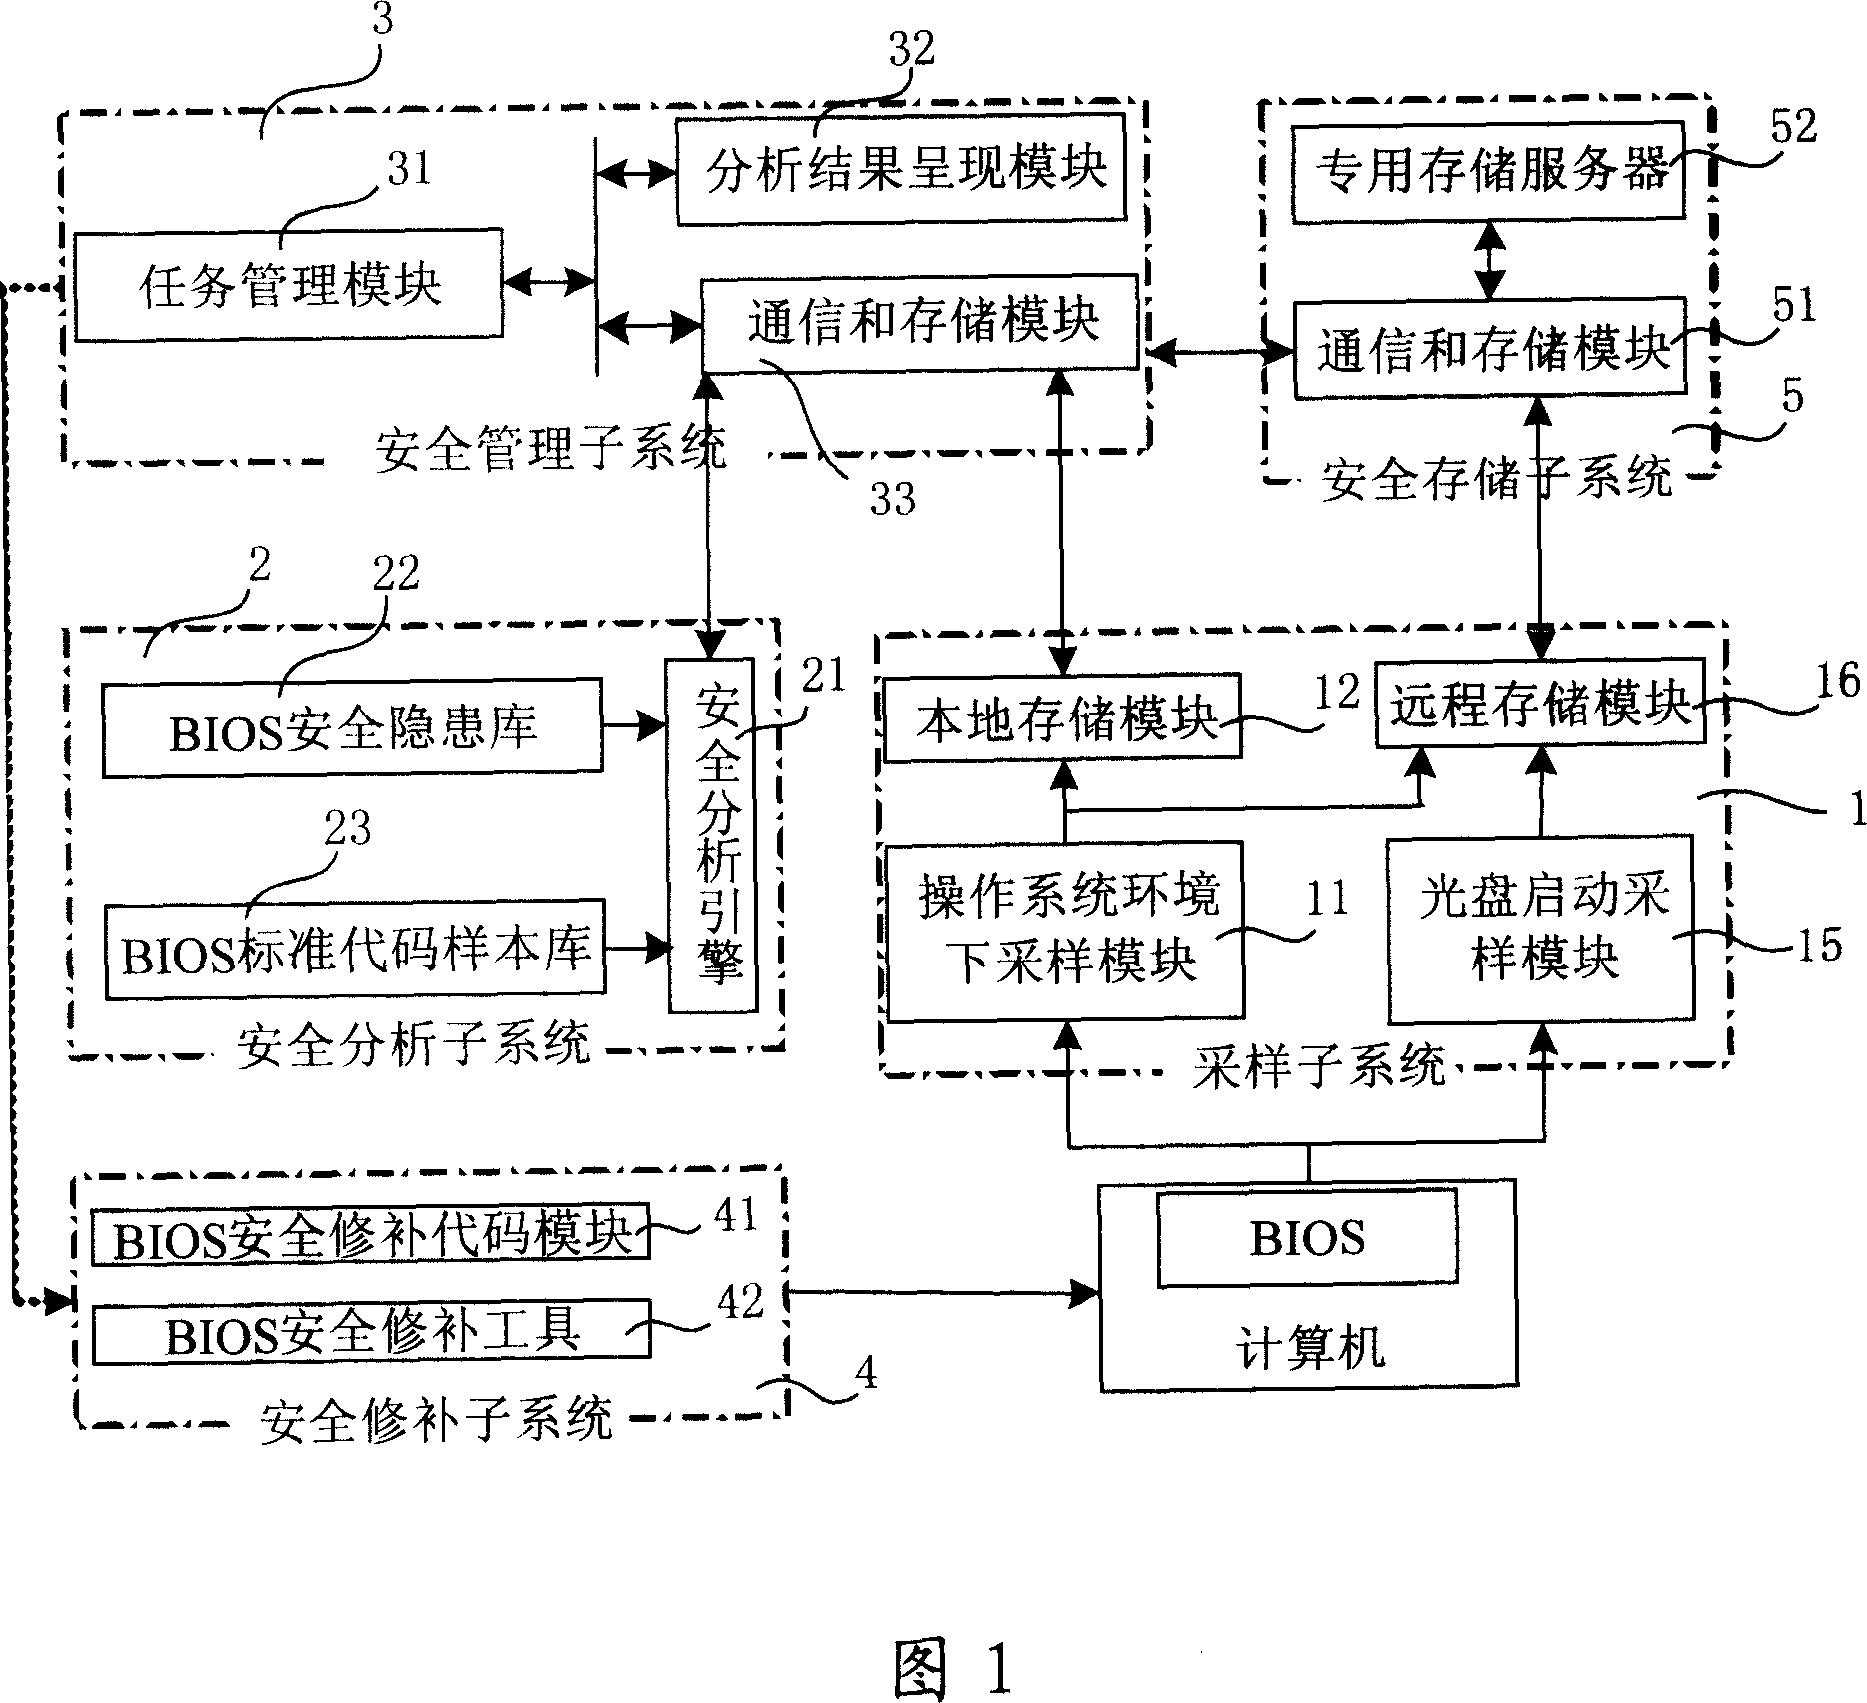 System and method for carrying out safety risk check to computer BIOS firmware